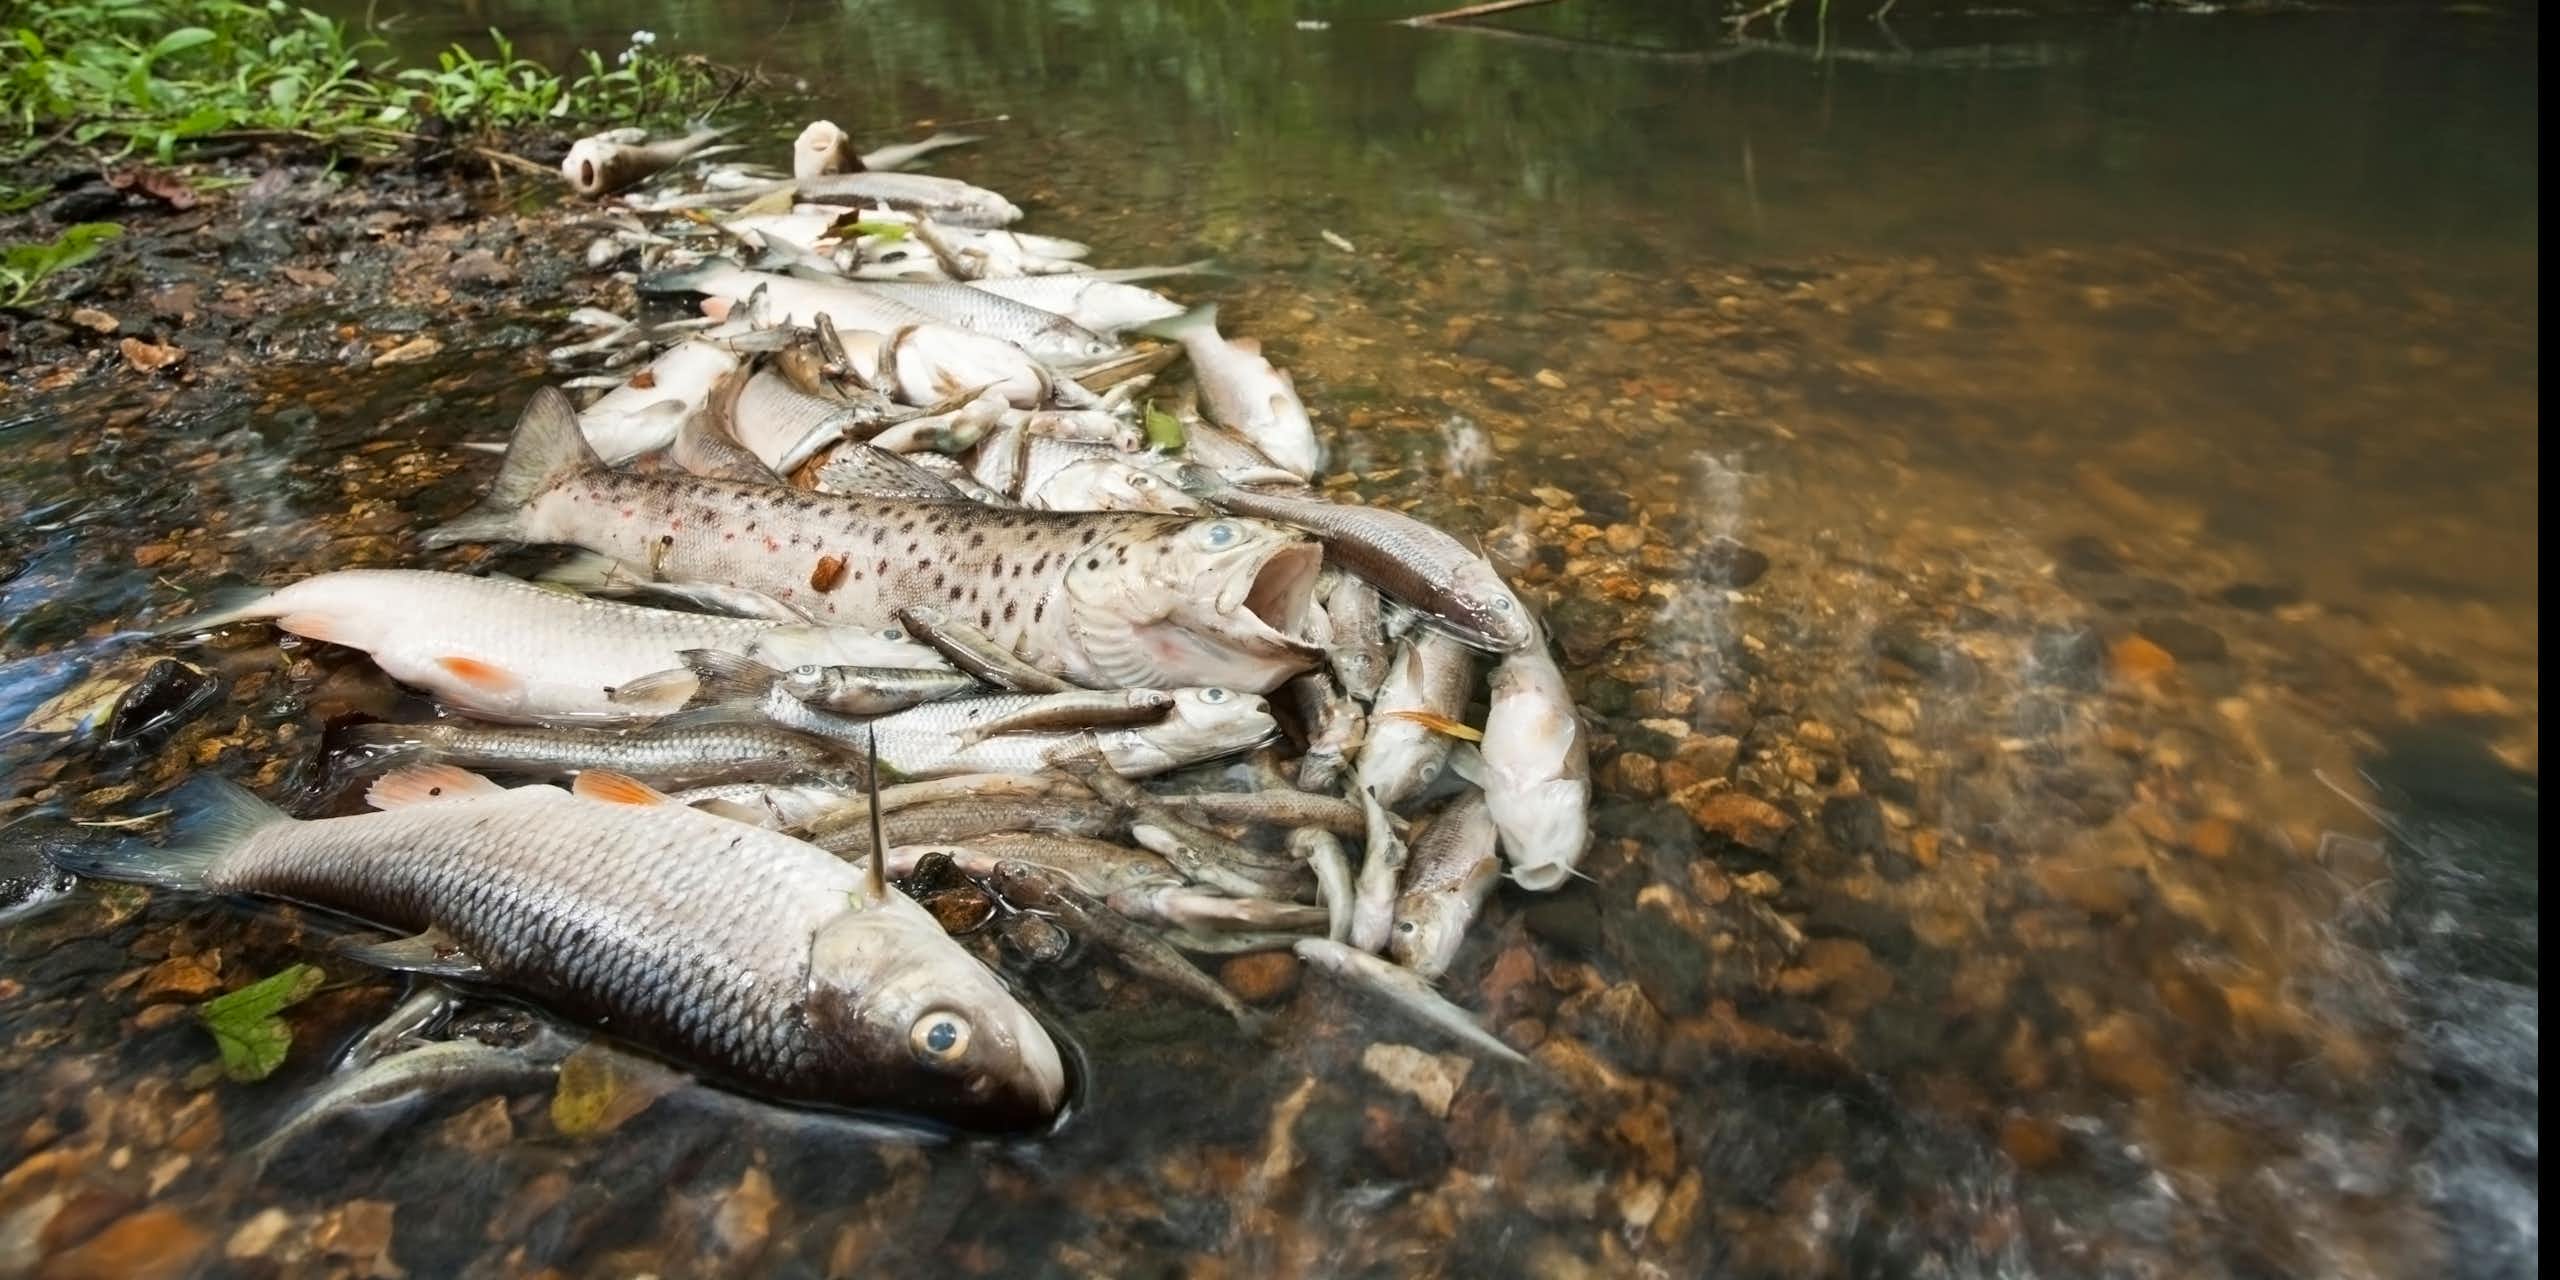 A pile of dead fish at the side of a river.